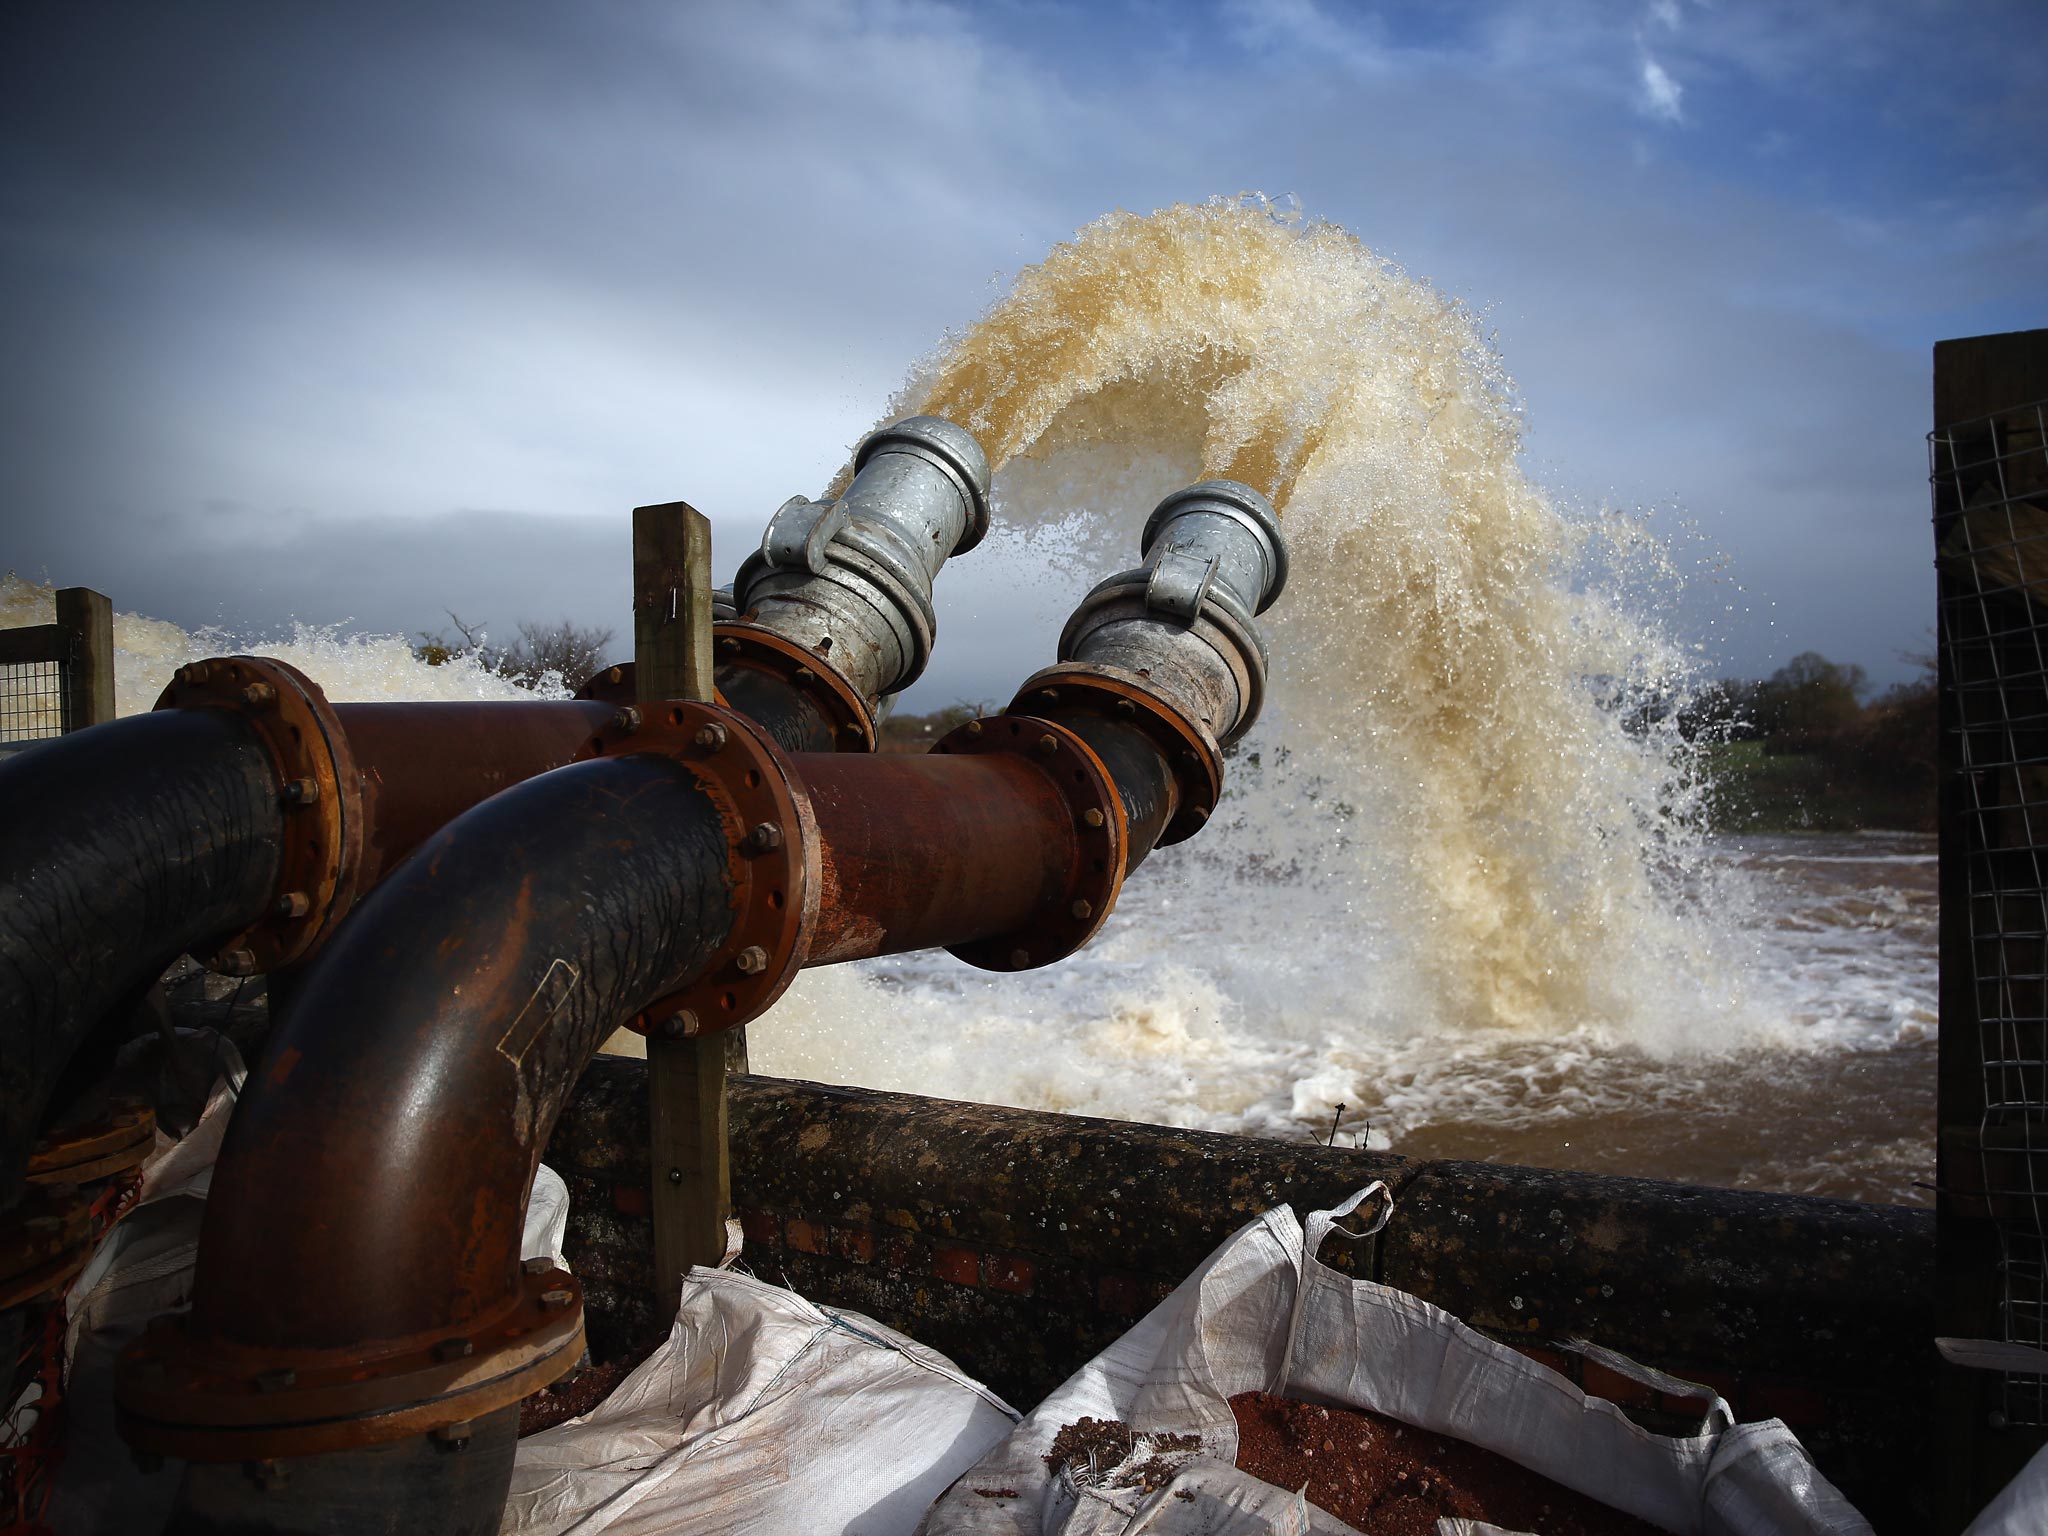 Flood water is seen pumped into the river at the pumping station near Fordgate on the Somerset Levels near Bridgwater